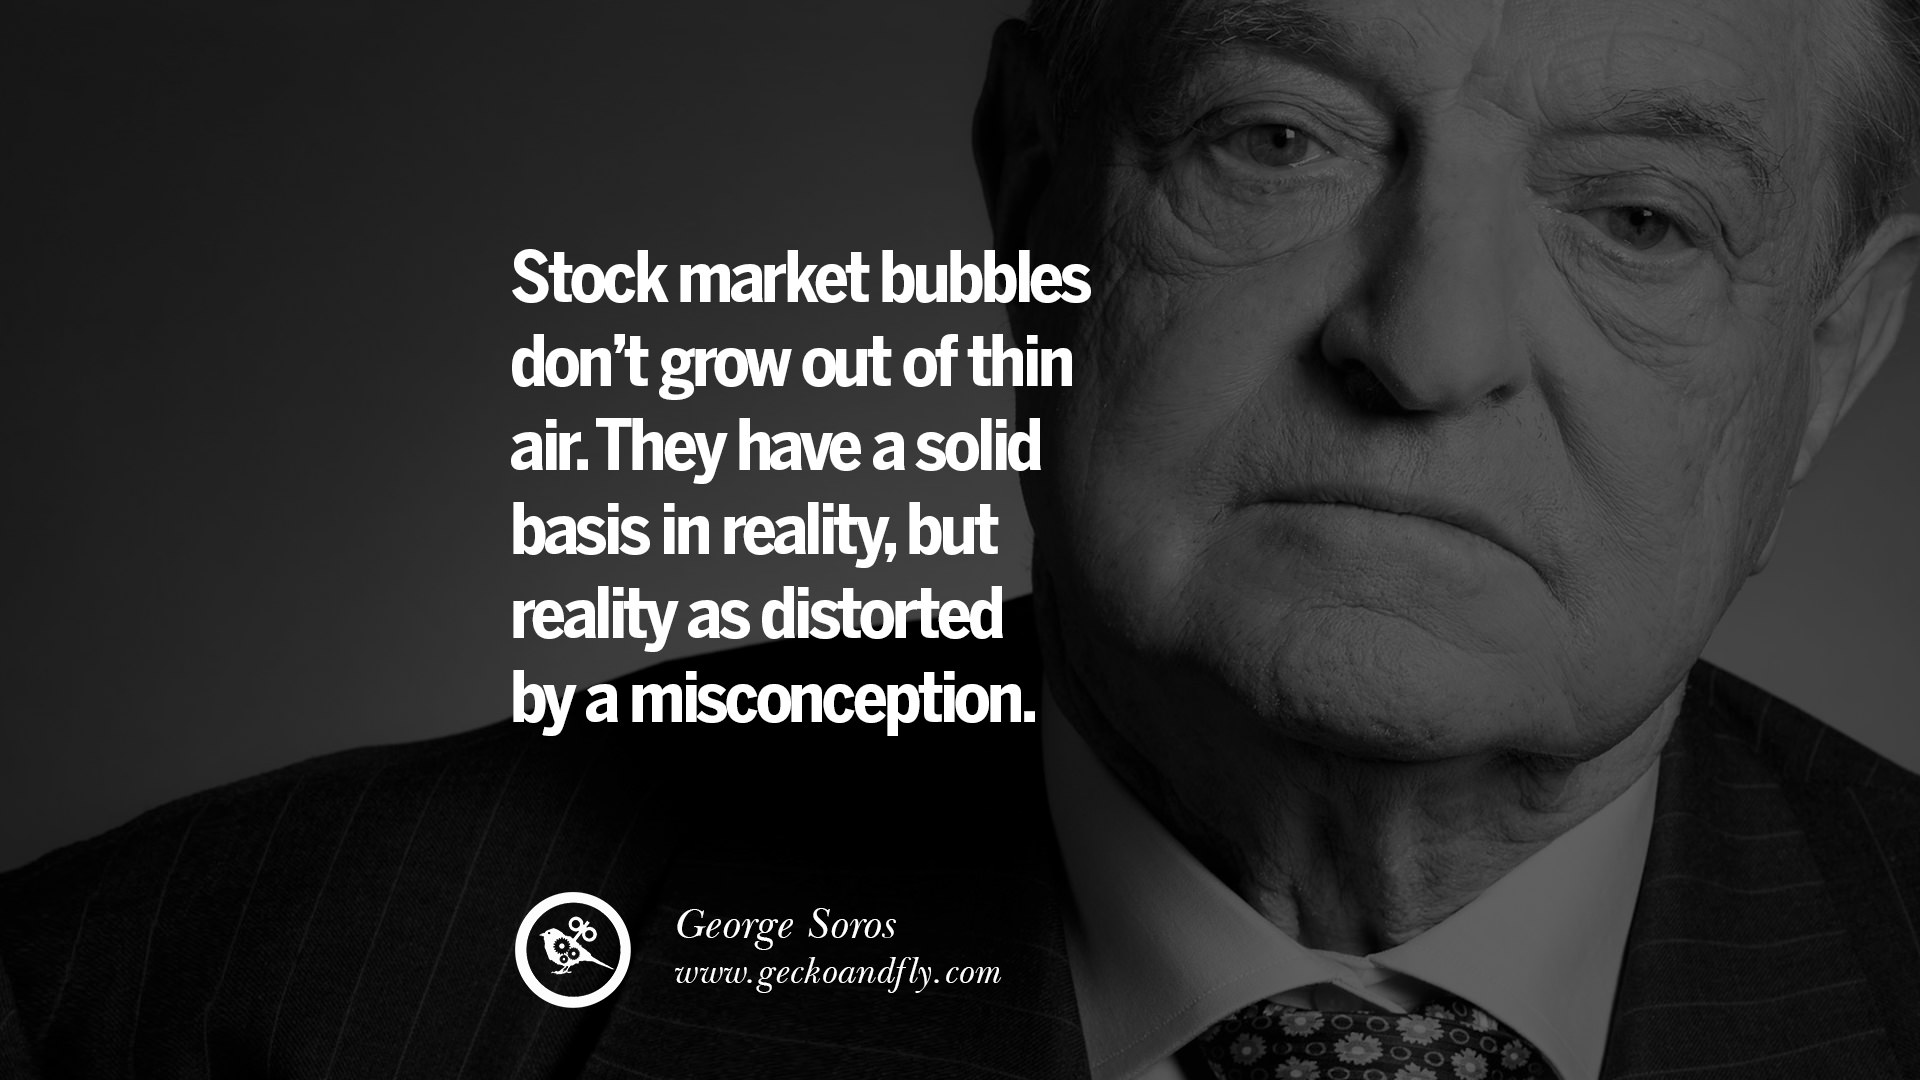 20 Inspiring Stock Market Investment Quotes by Successful 